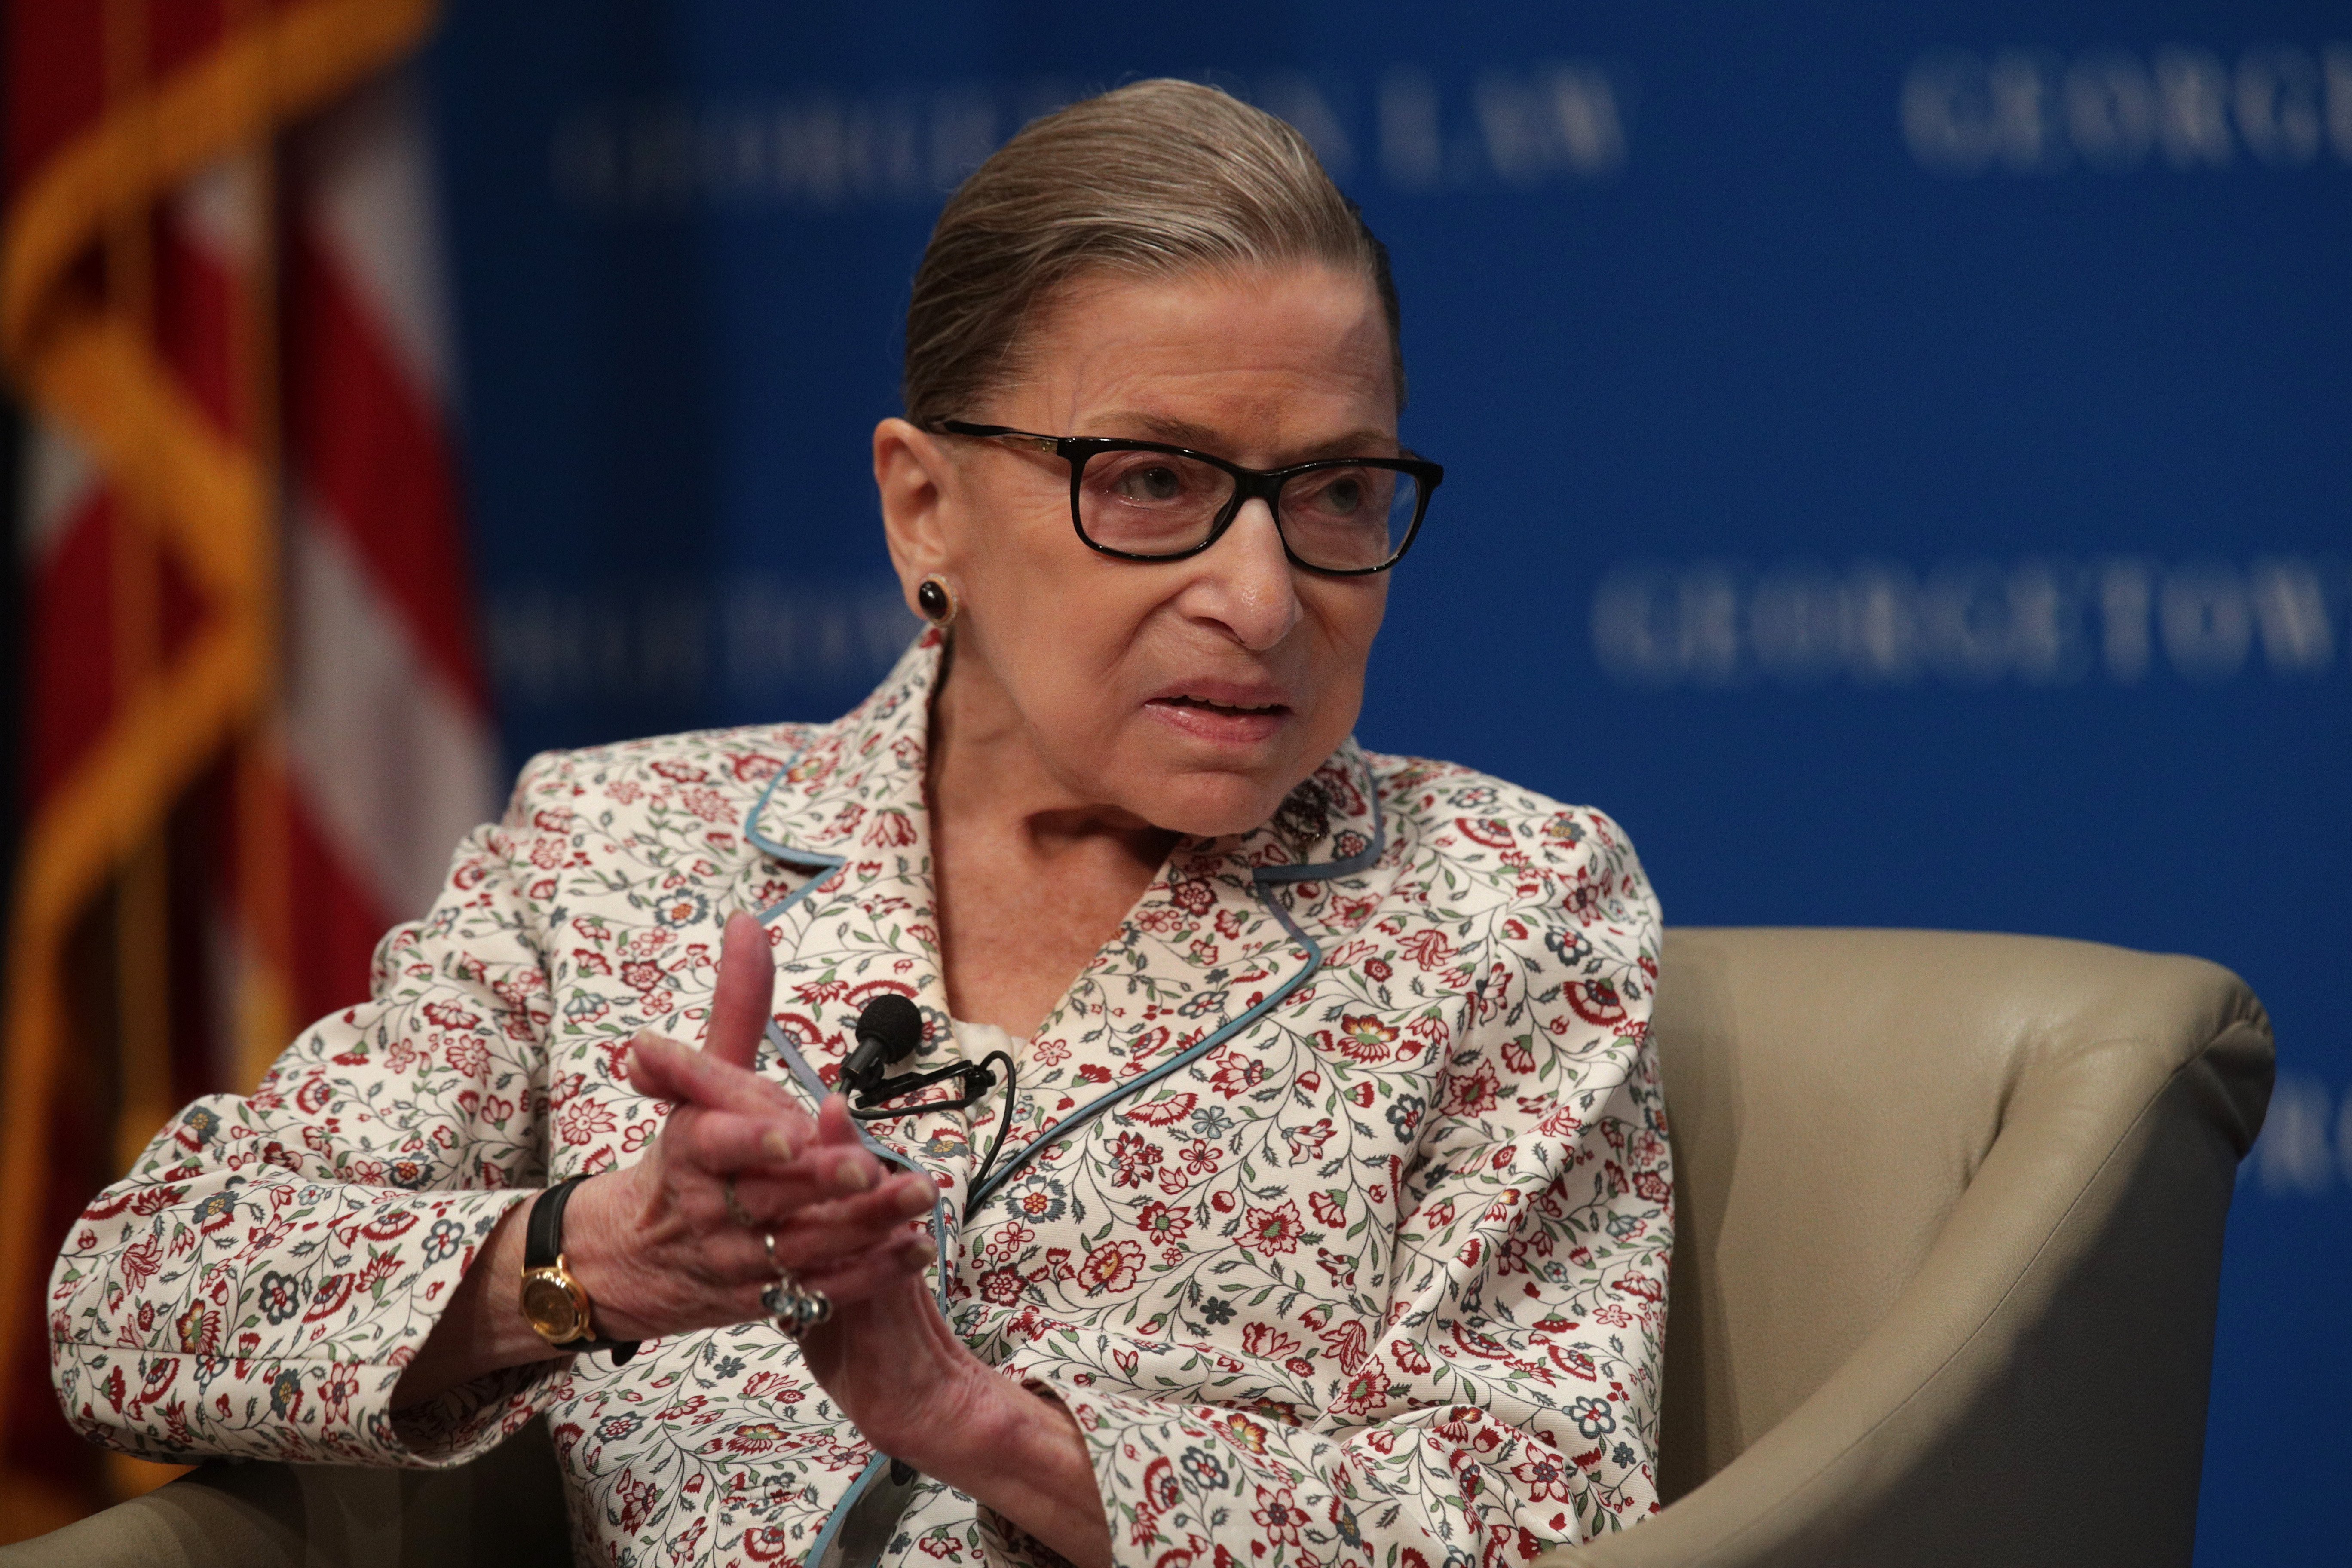 Supreme Court Associate Justice Ruth Bader Ginsburg participates in a discussion at Georgetown University Law Center July 2, 2019 in Washington, DC | Photo: Getty Images